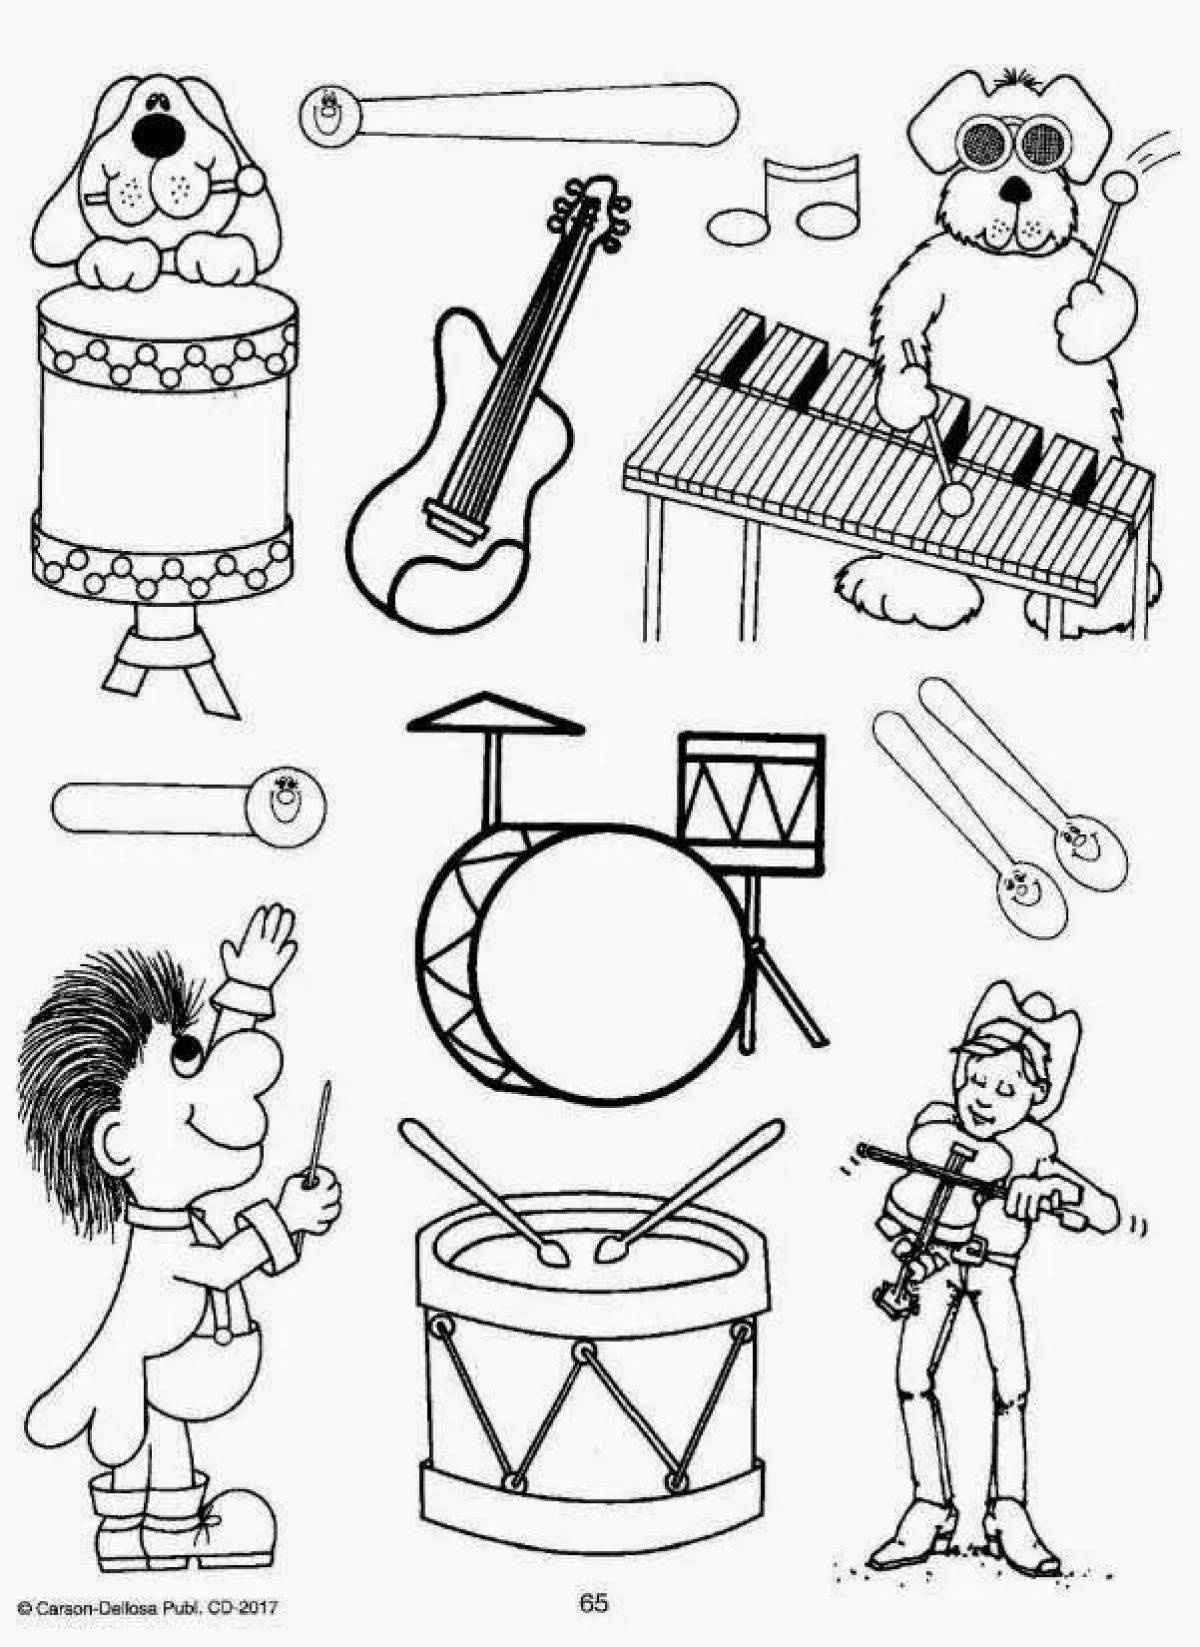 Musical instruments for children 6 7 years old #11